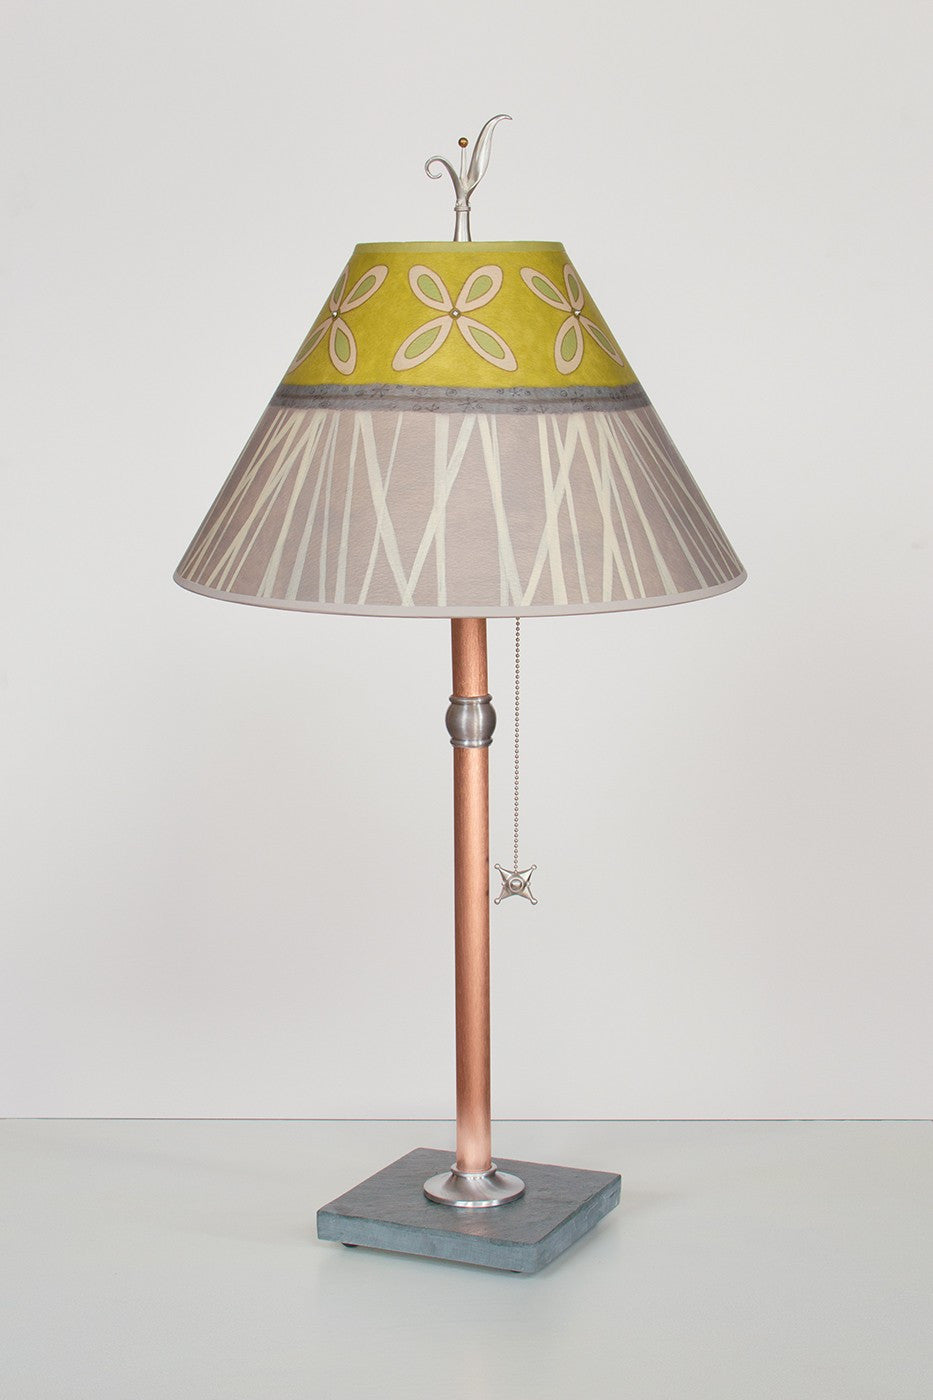 Copper Table Lamp with Conical Shade in Kiwi - Eclipse Gallery